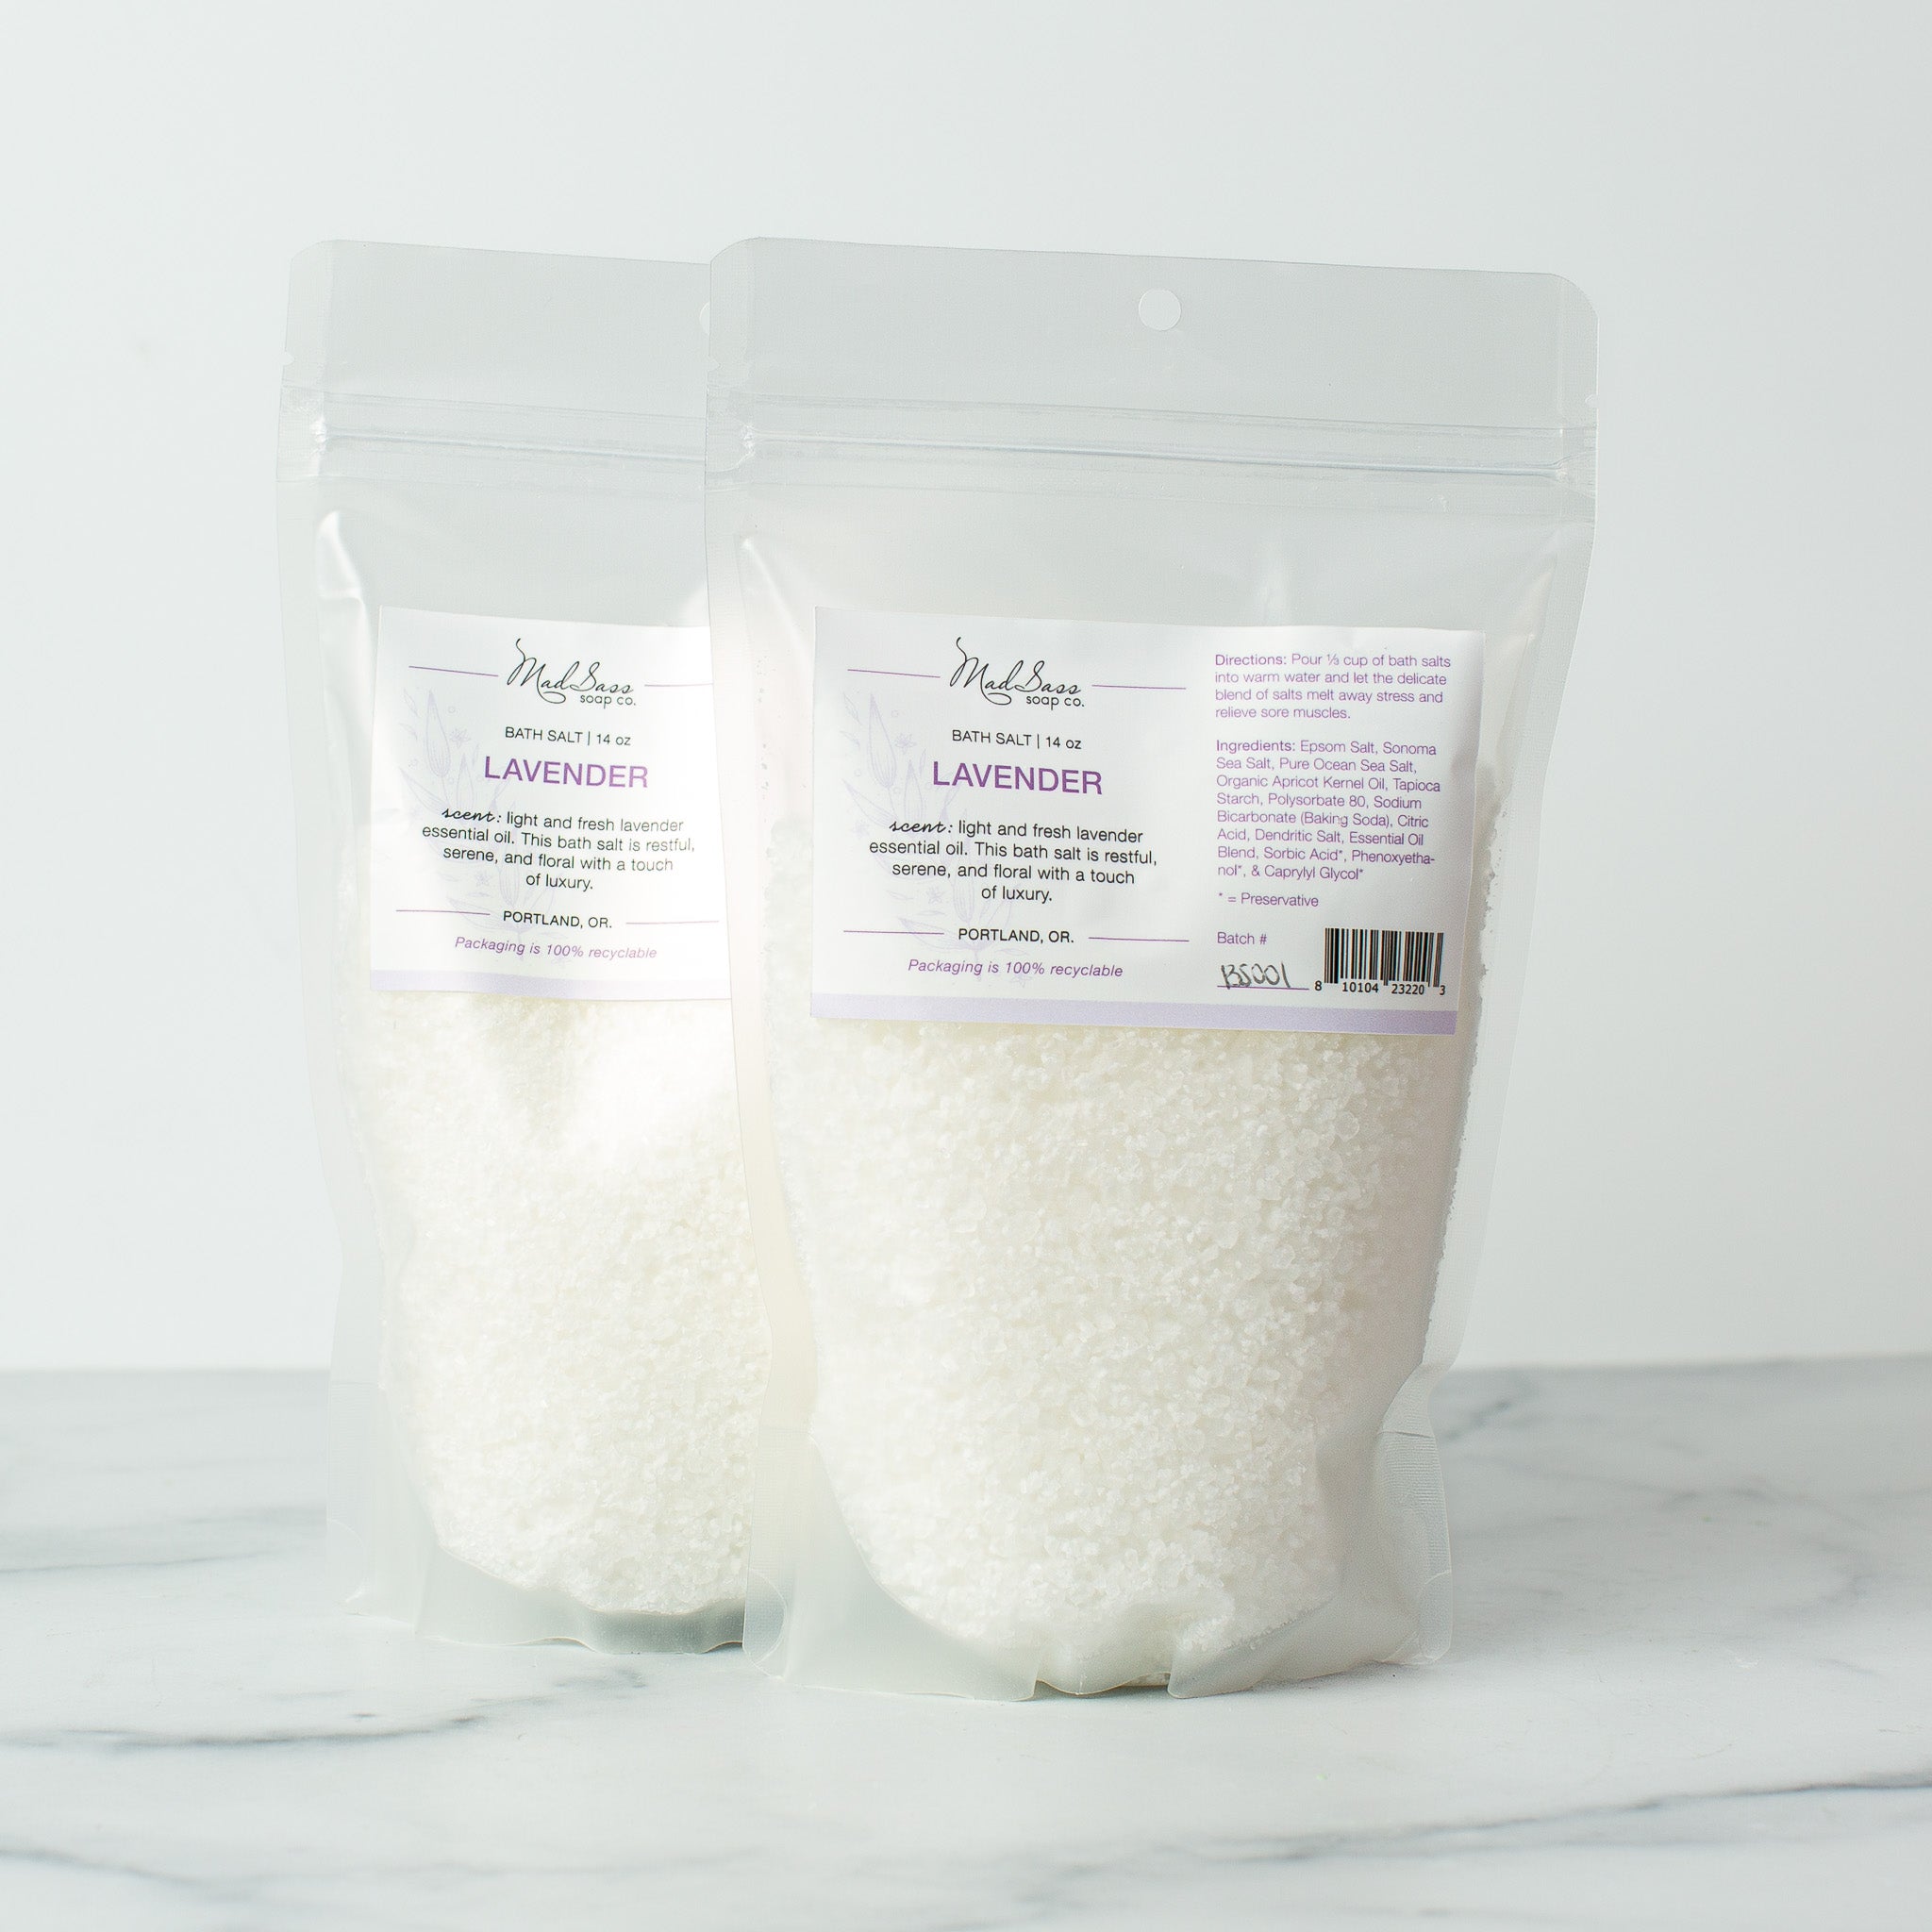 Two bags of Lavender bath salts on a white background. Lavender bath salts are pure white..